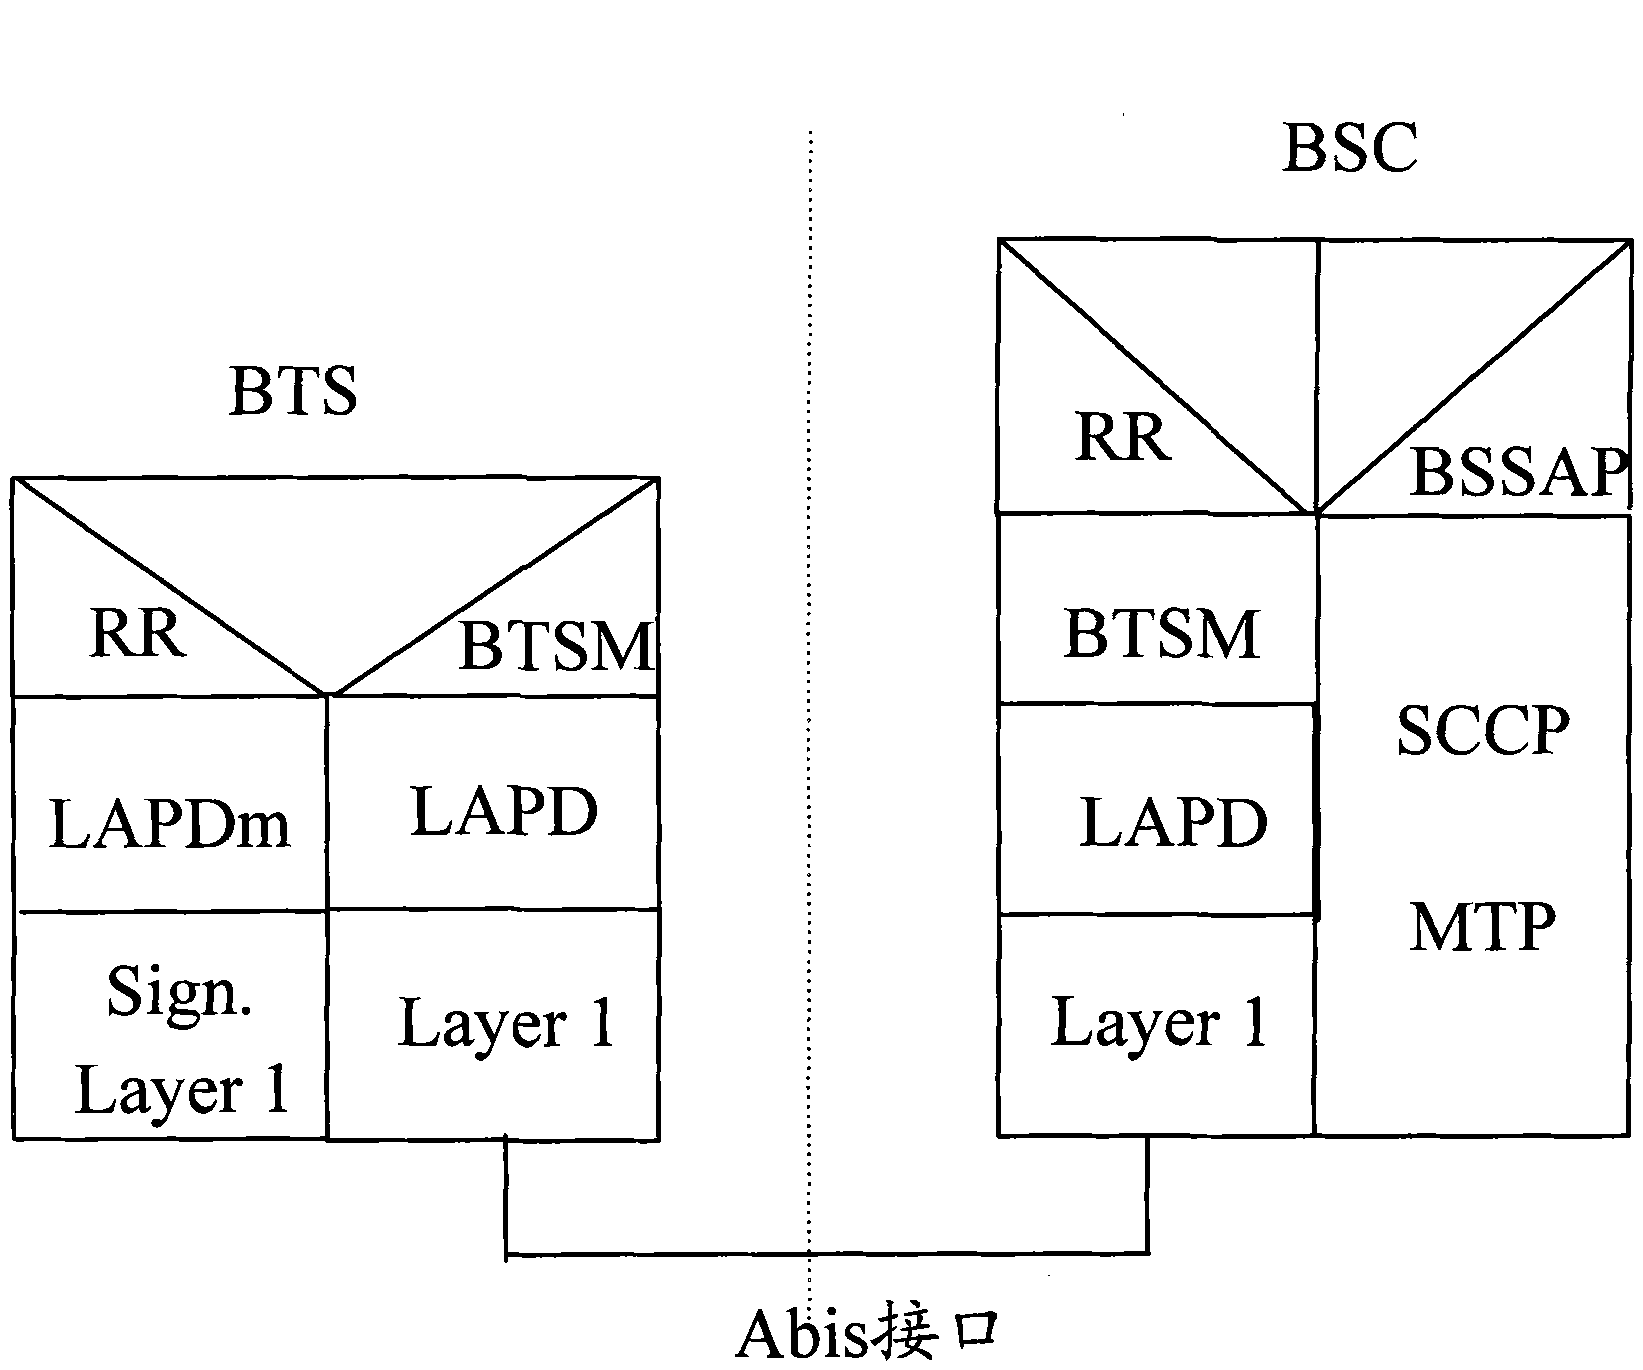 Processing method of Abis interface signaling